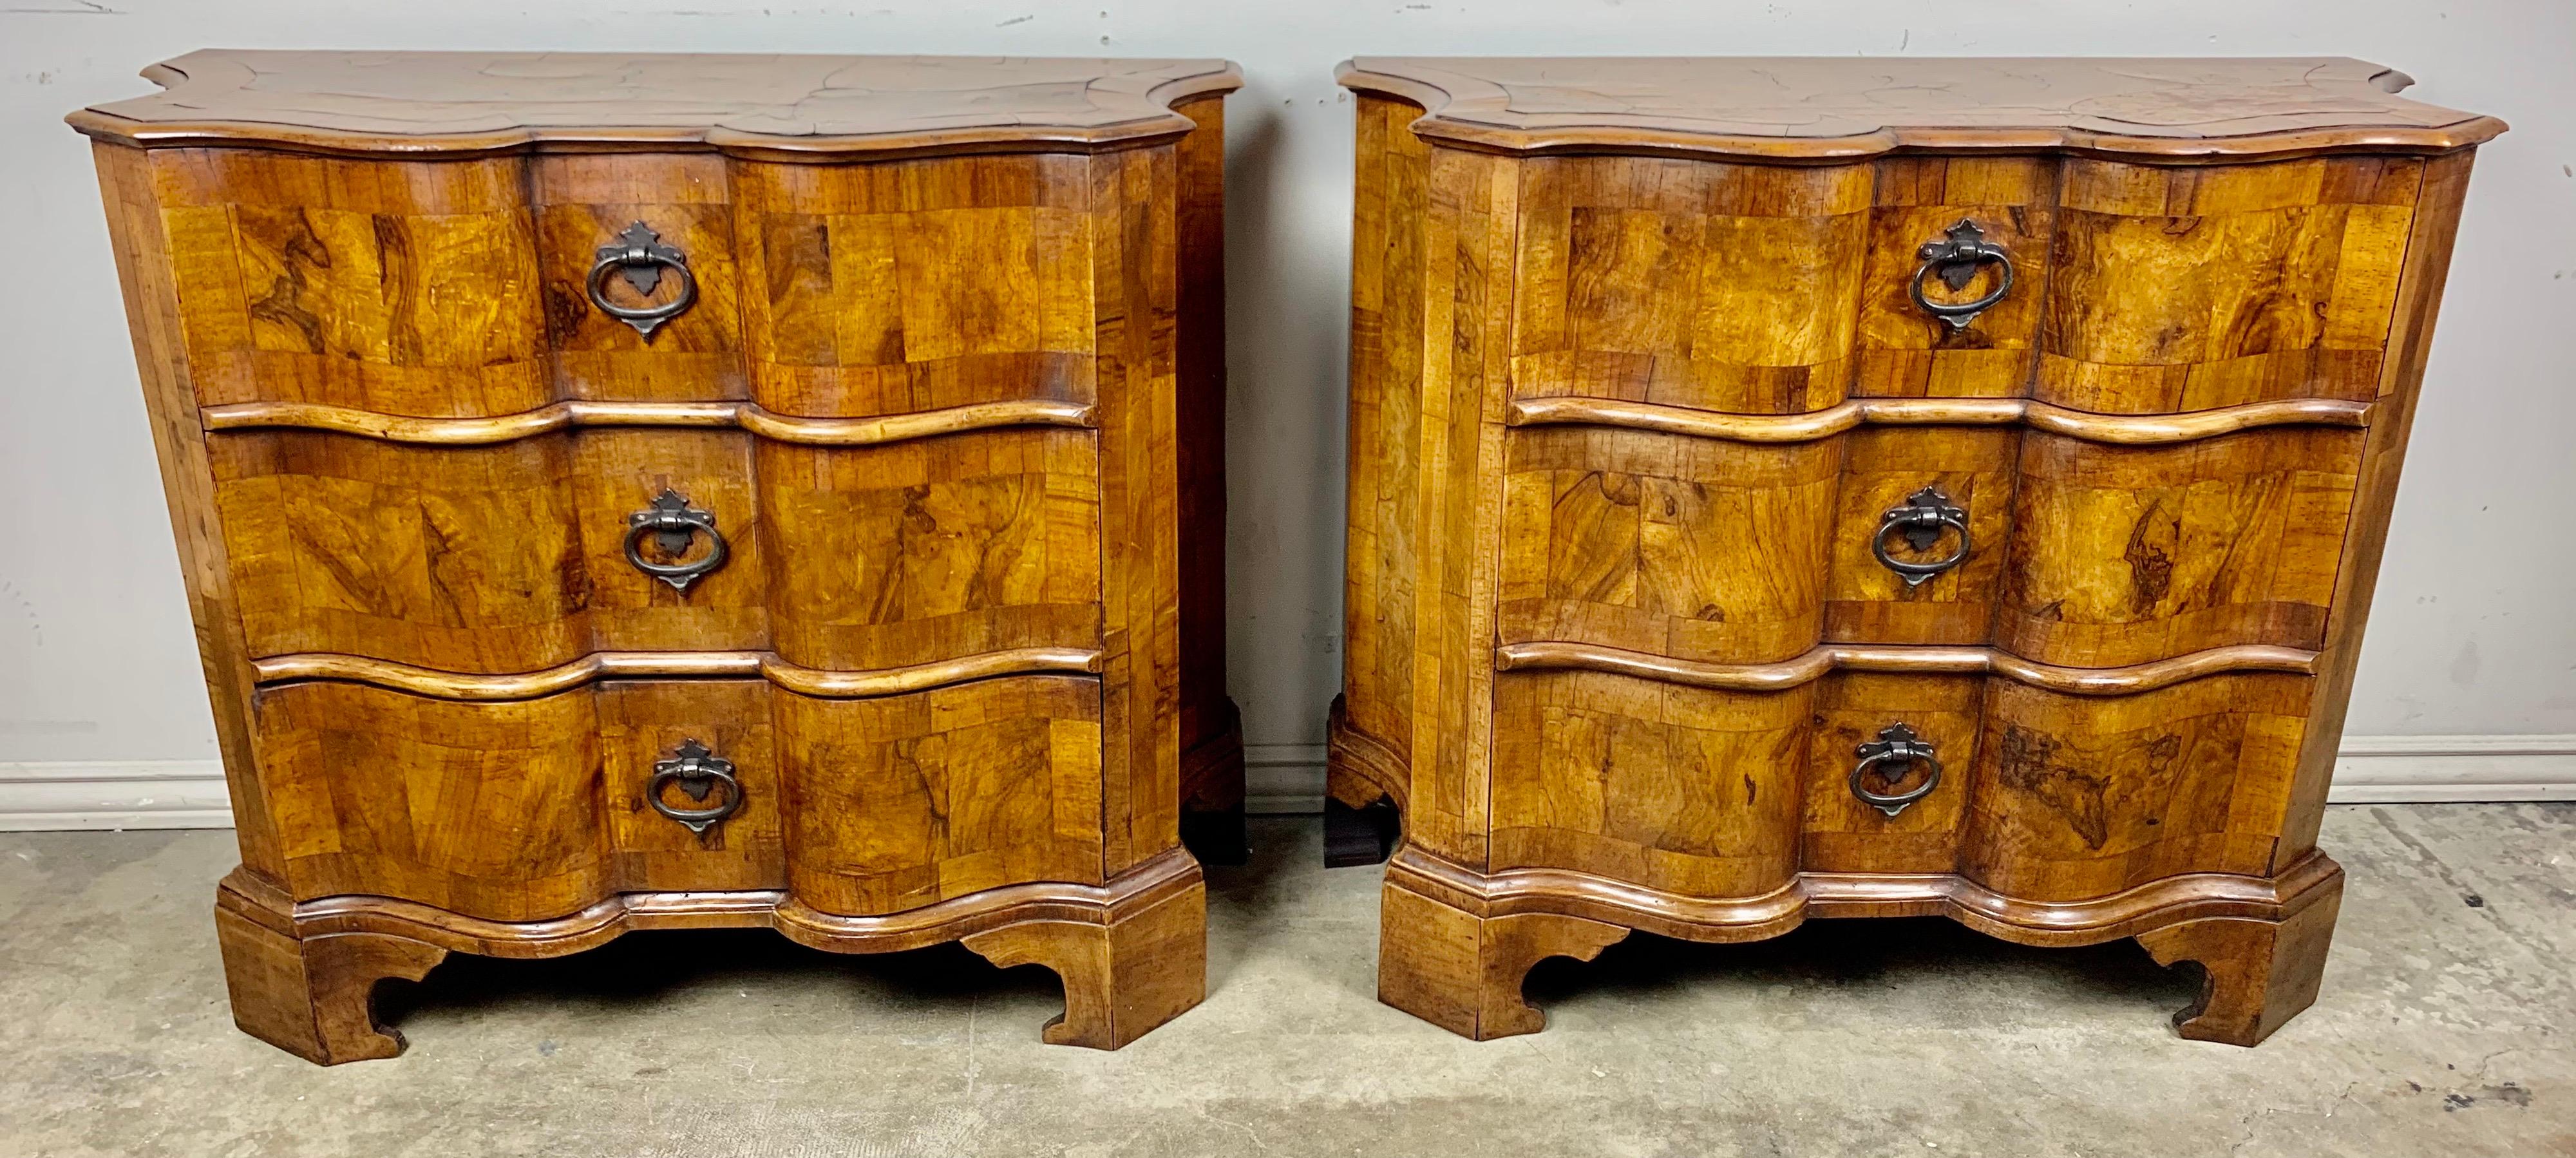 Pair of 1930's Italian serpentine shaped burl walnut 3-drawer commodes. The commodes are beautifully made and have developed a nice patina over the years. Original hardware.